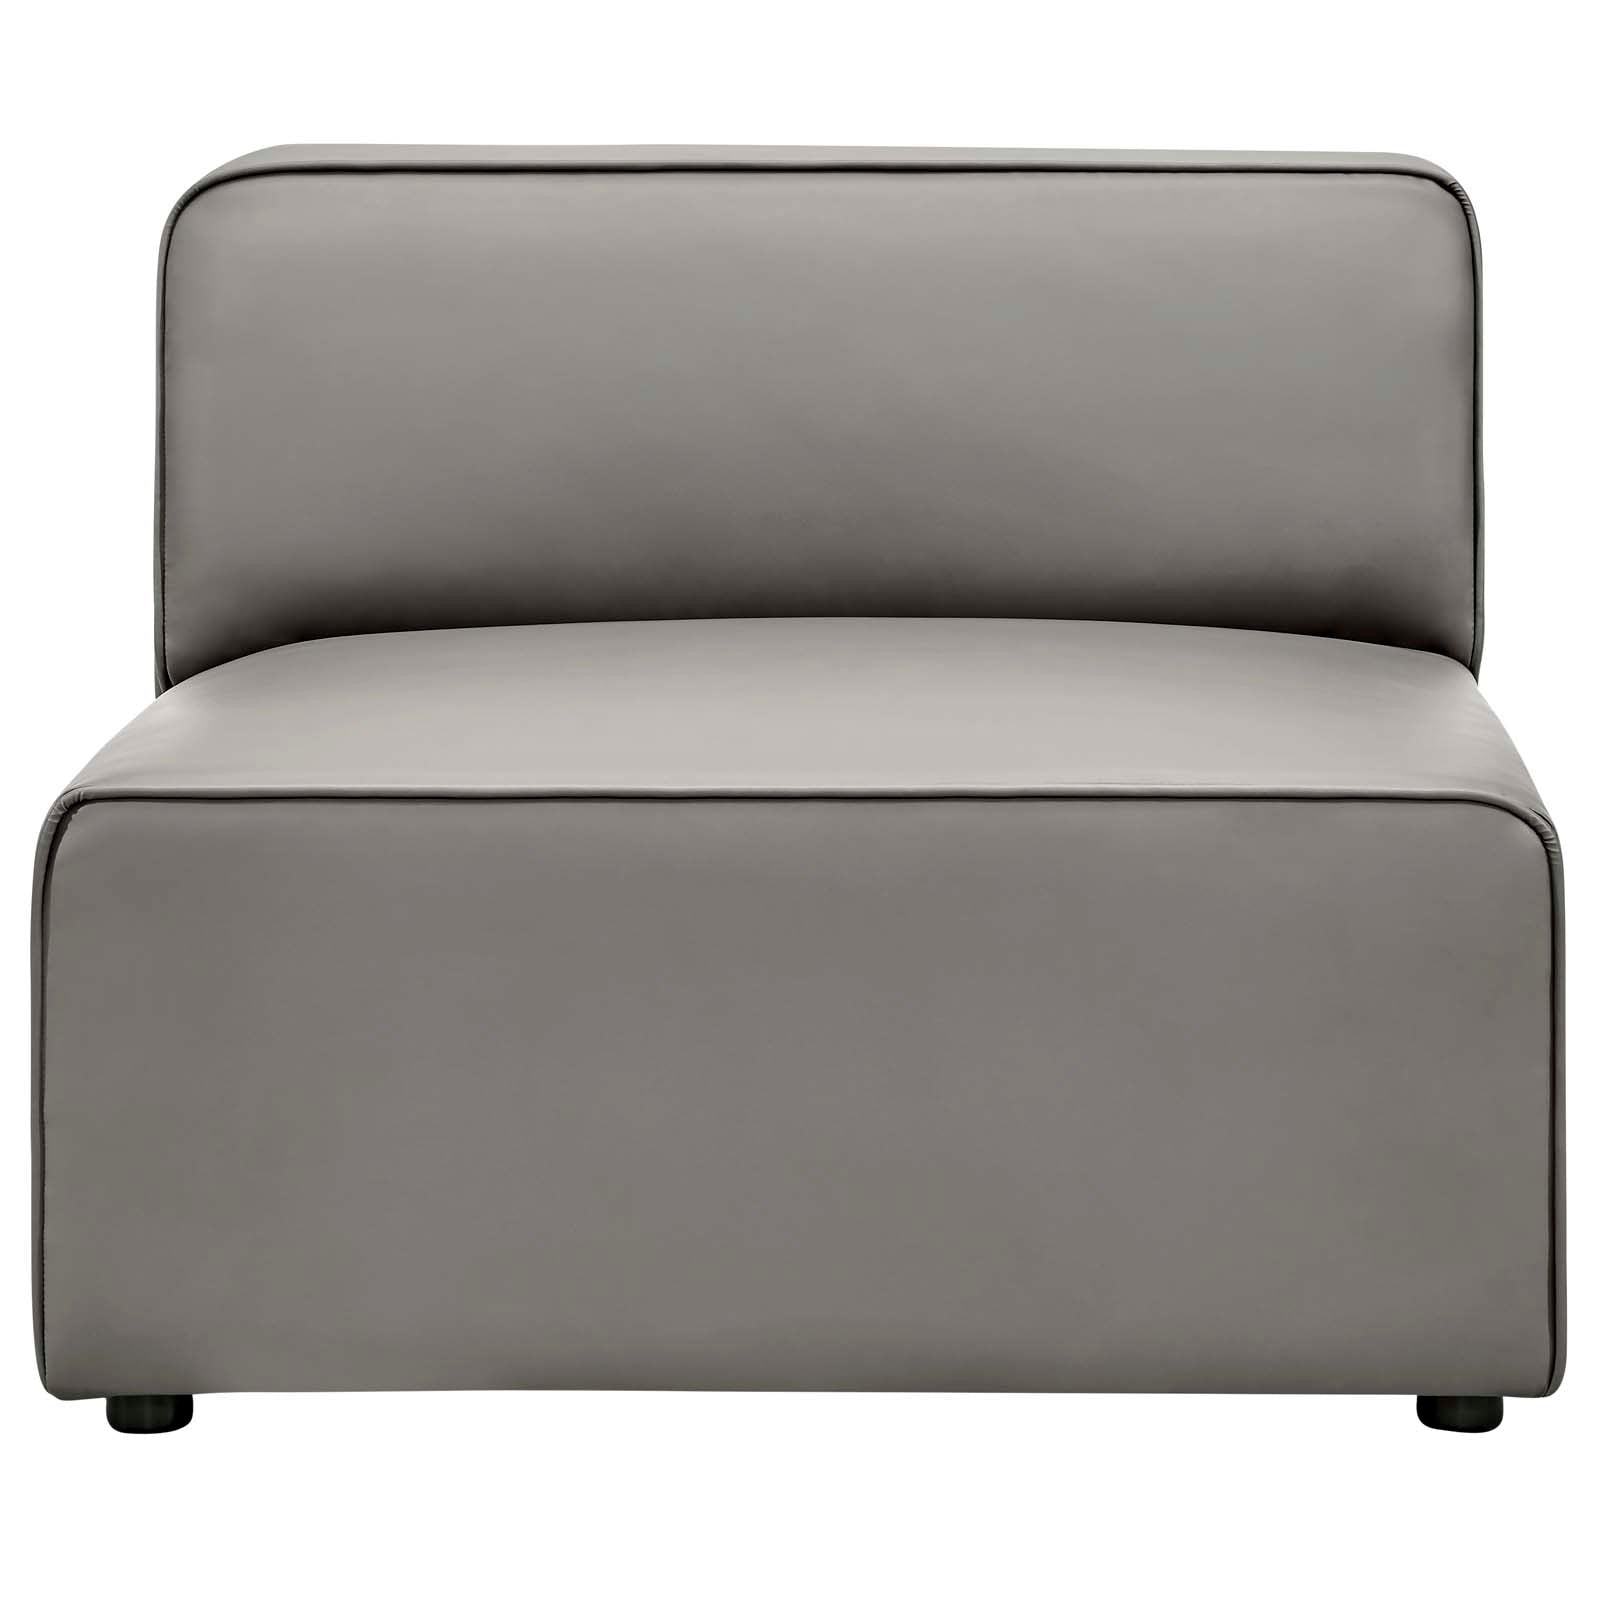 Modway Accent Chairs - Mingle Vegan Leather Armless Chair Gray